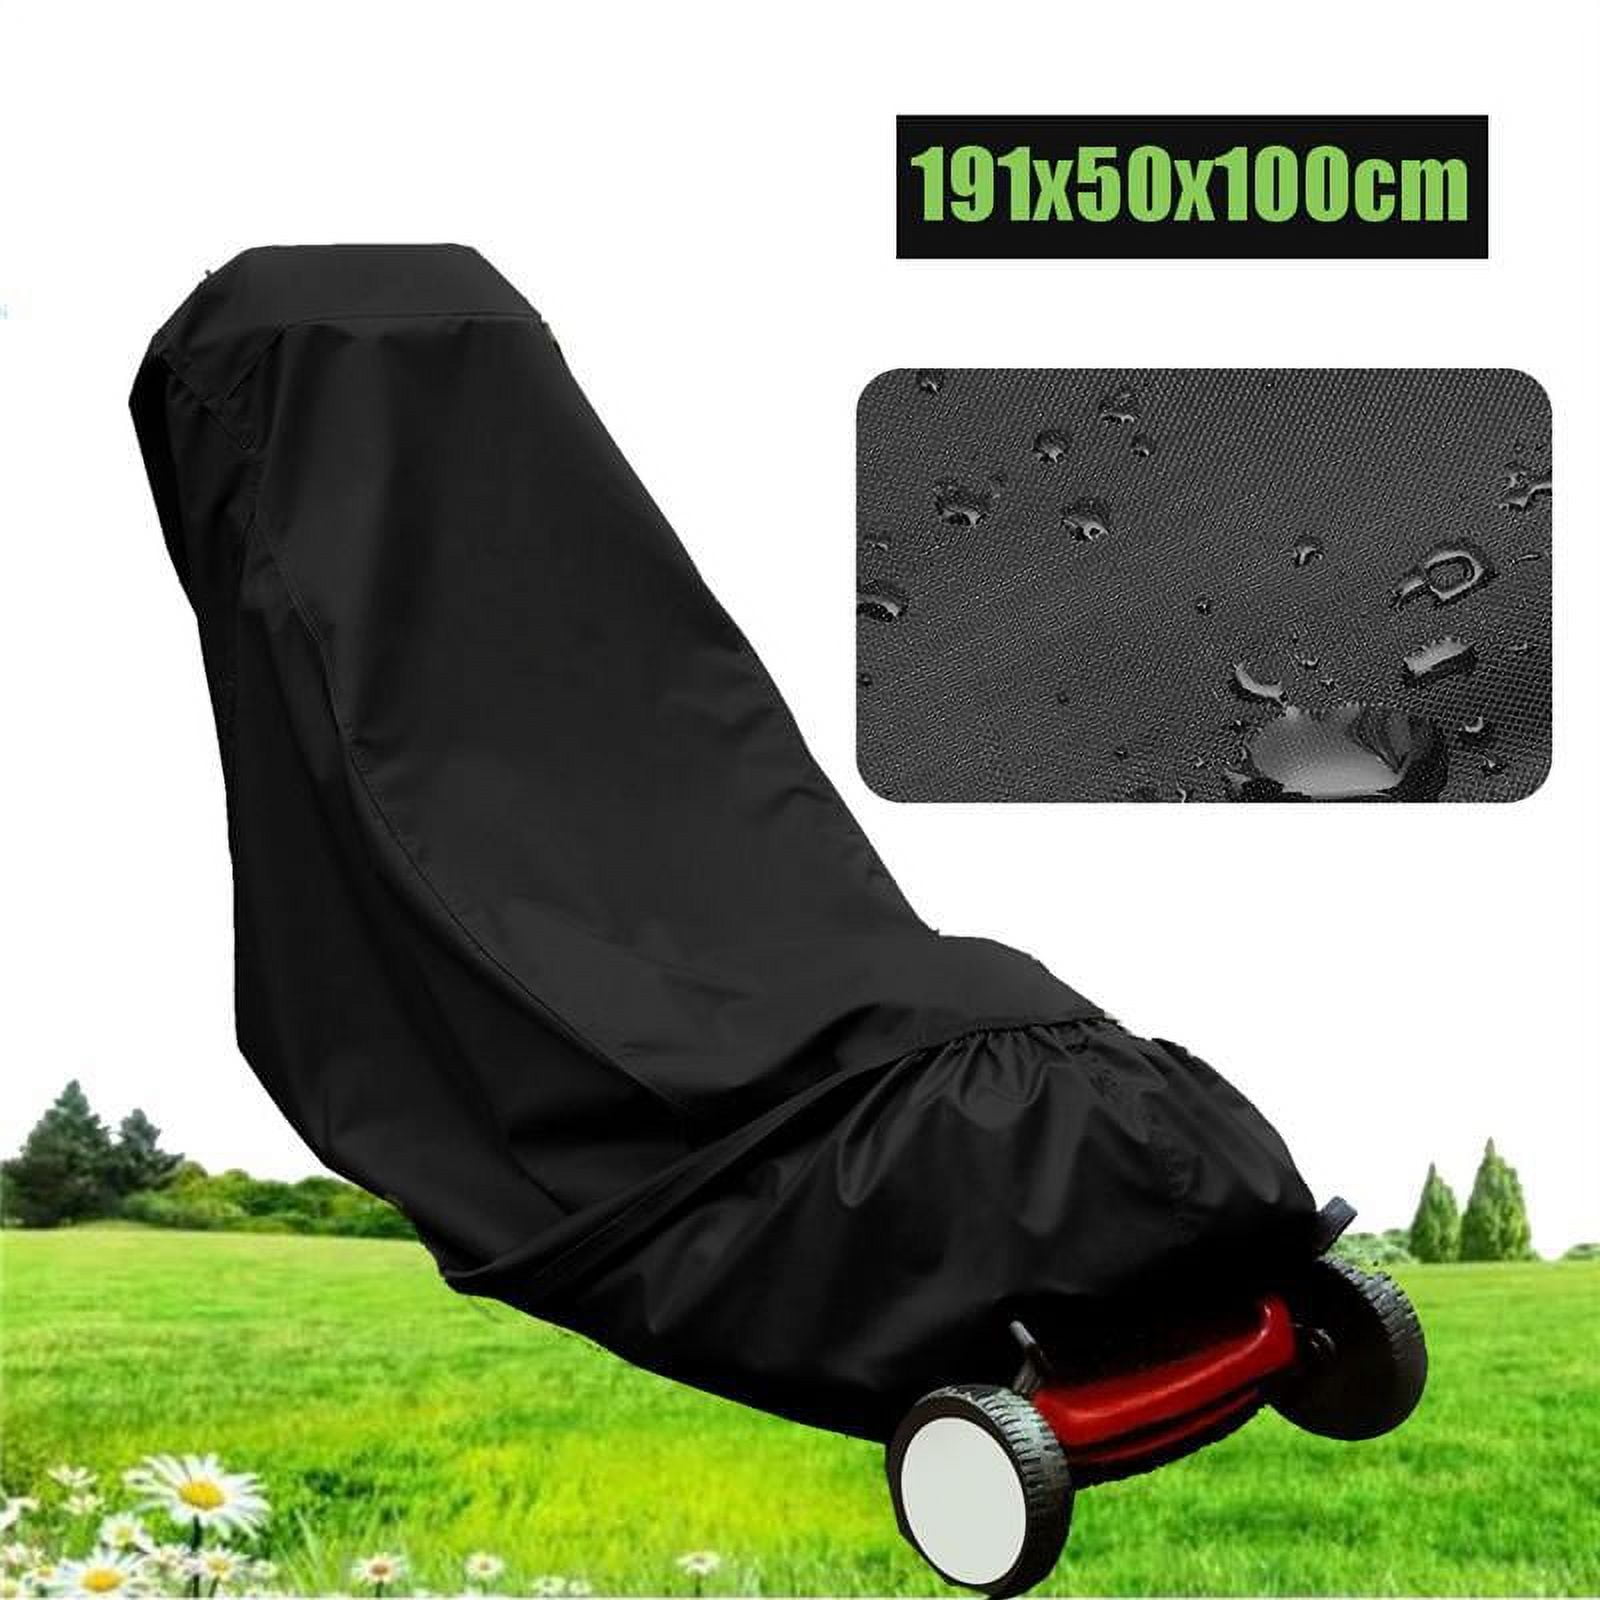 Outdoor Lawn Mower Cover, Patio Push Mower Cover 